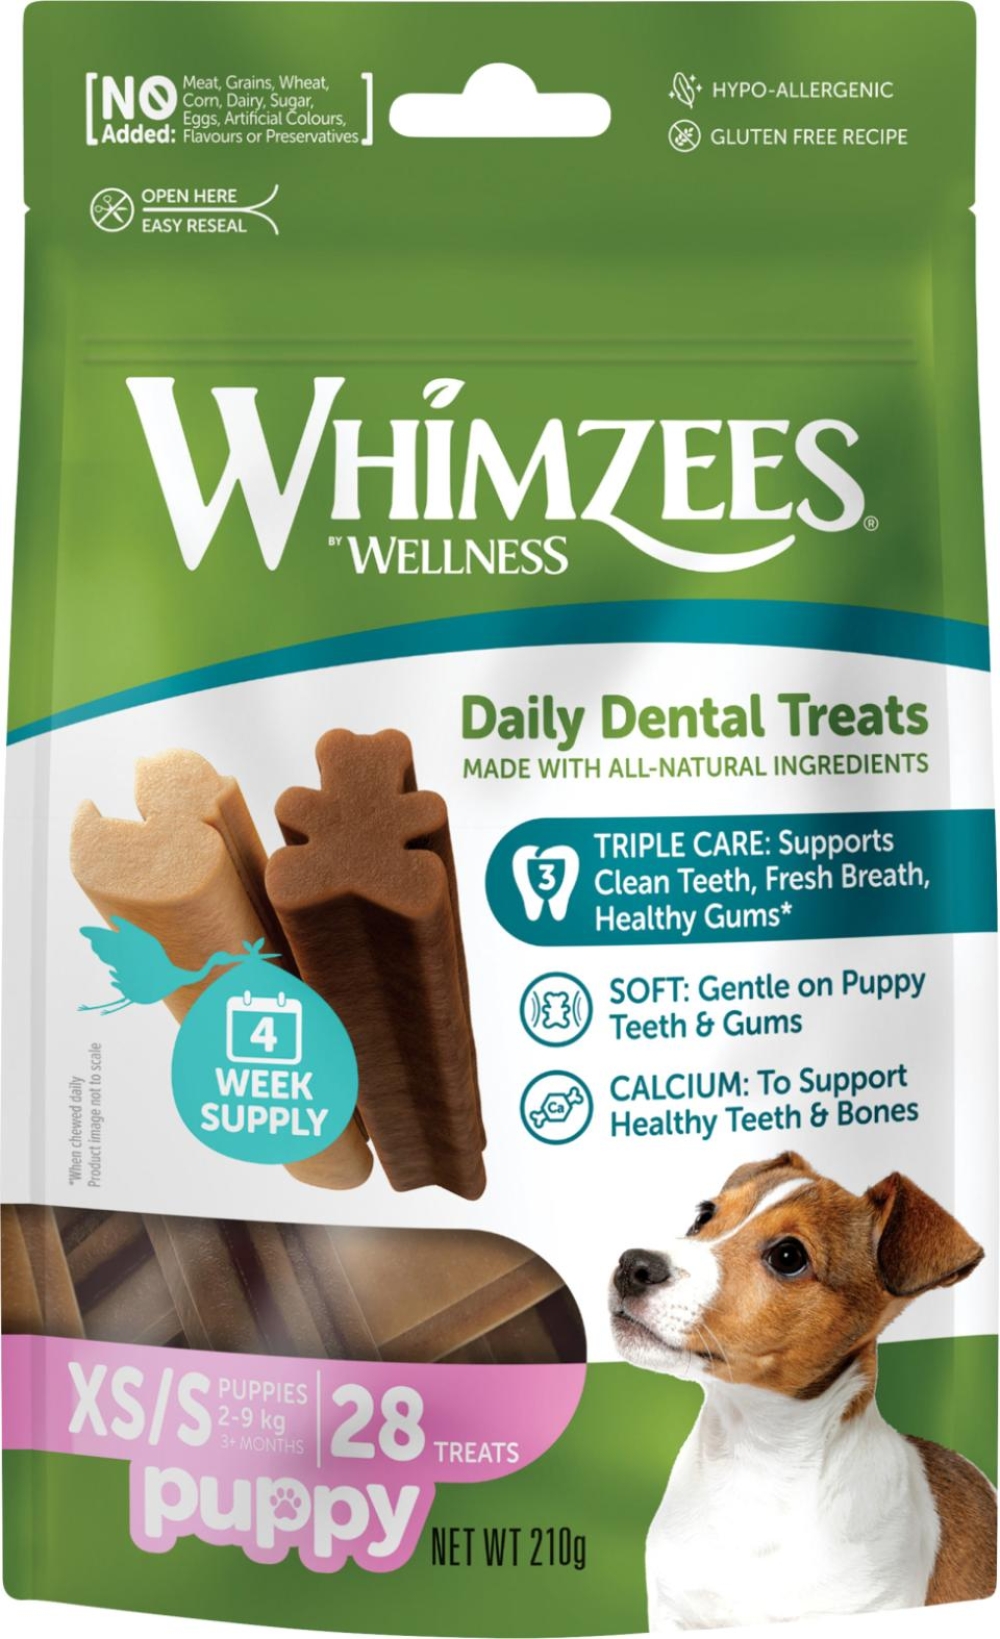 Whimzees Puppy Value Bag XS/S Pose